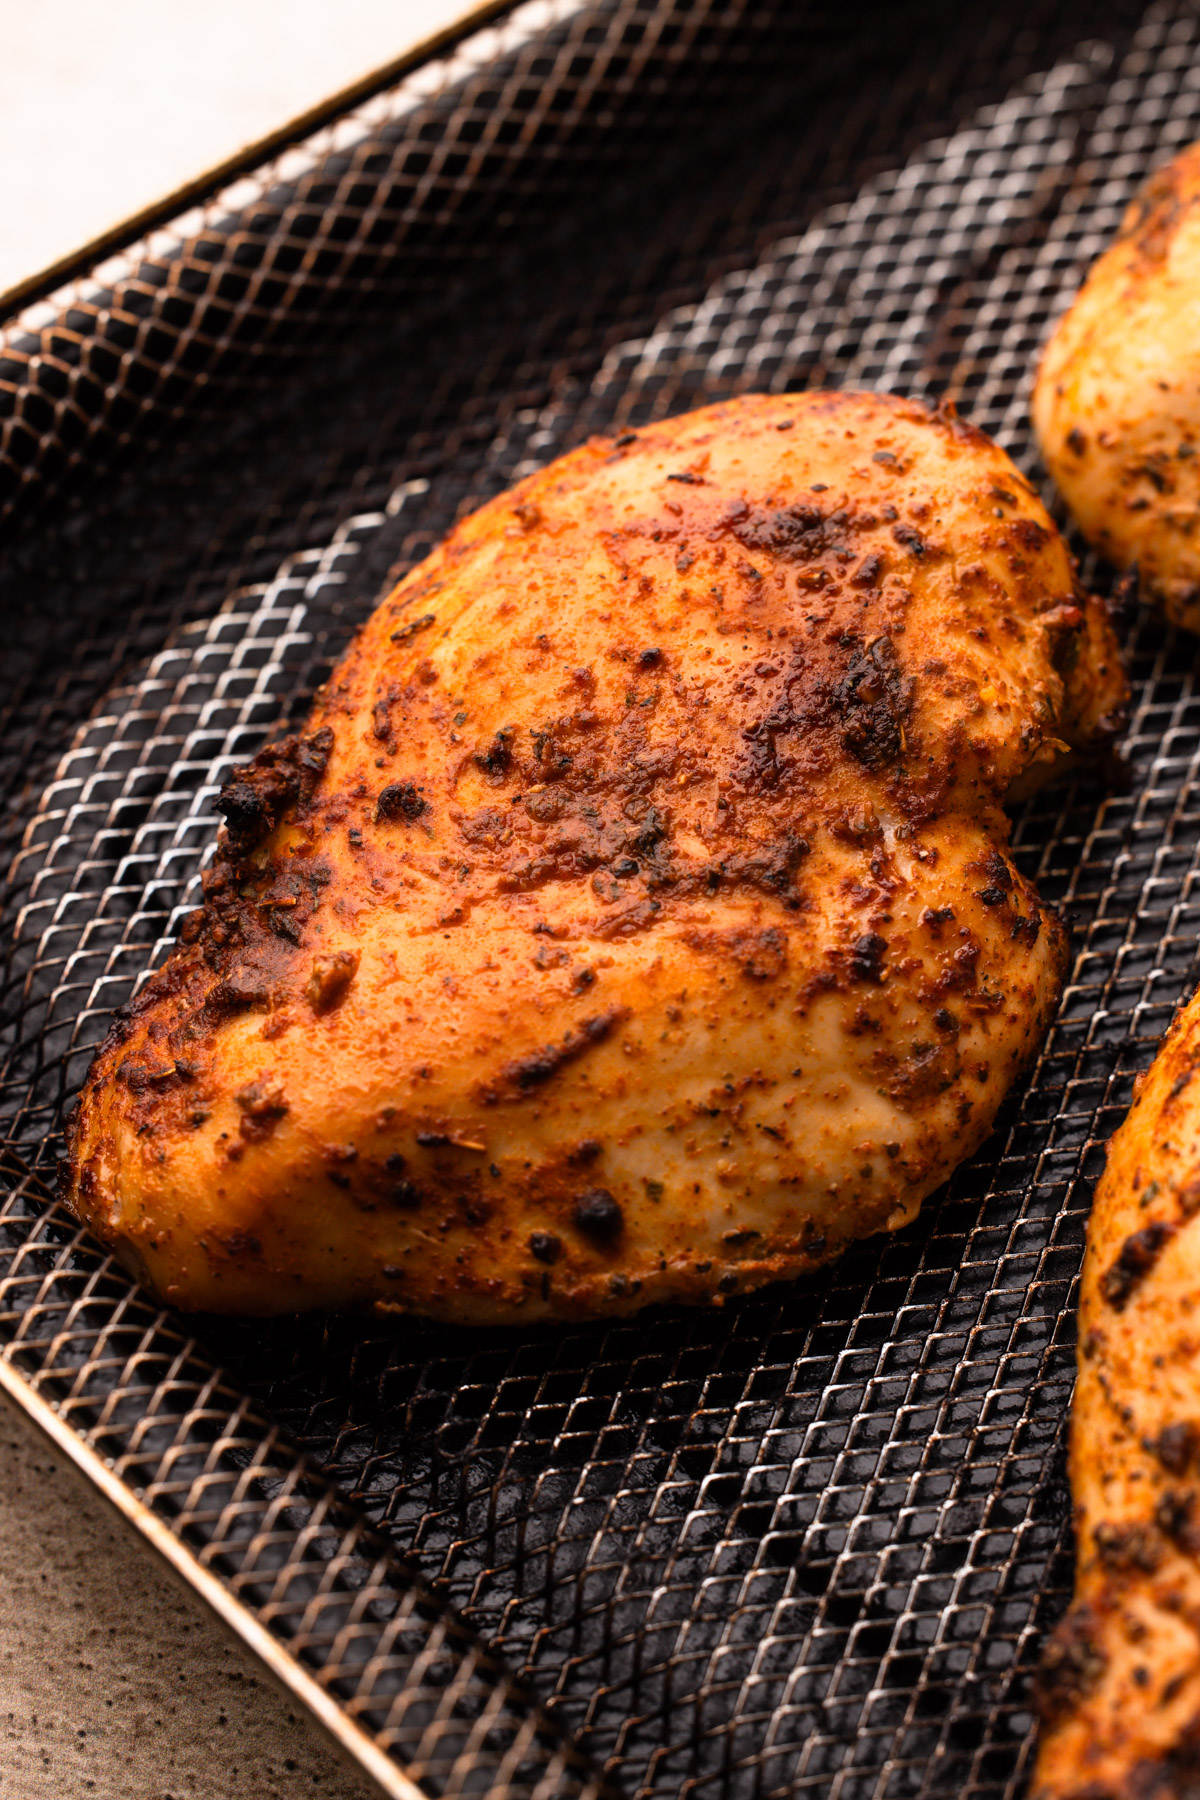 A cooked air fryer chicken breasts with spices.